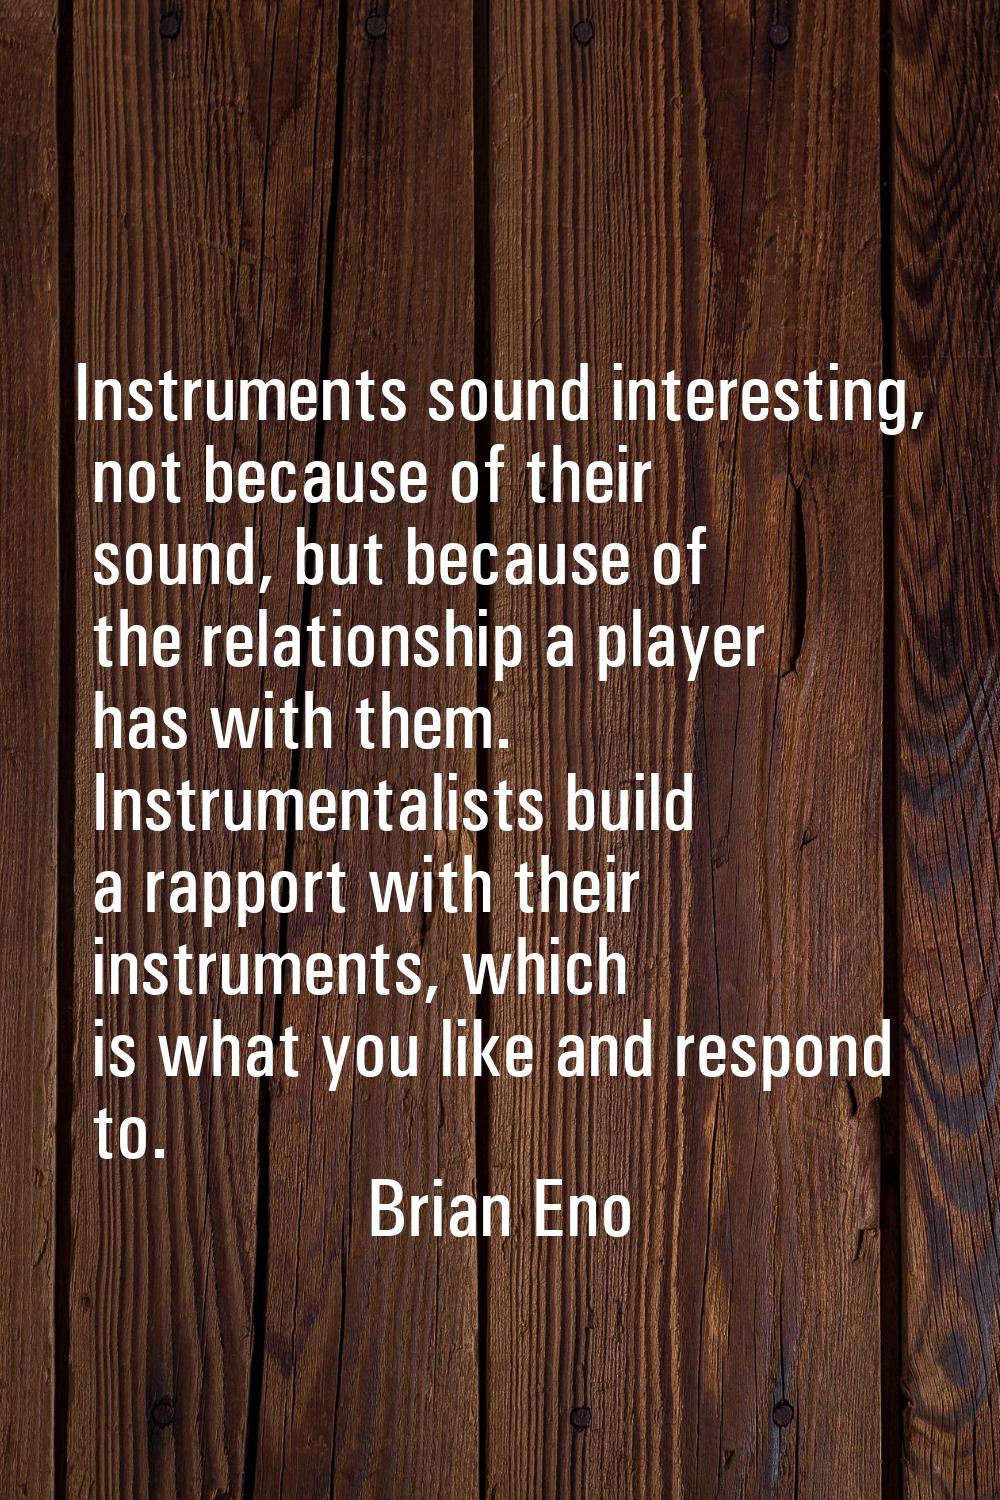 Instruments sound interesting, not because of their sound, but because of the relationship a player